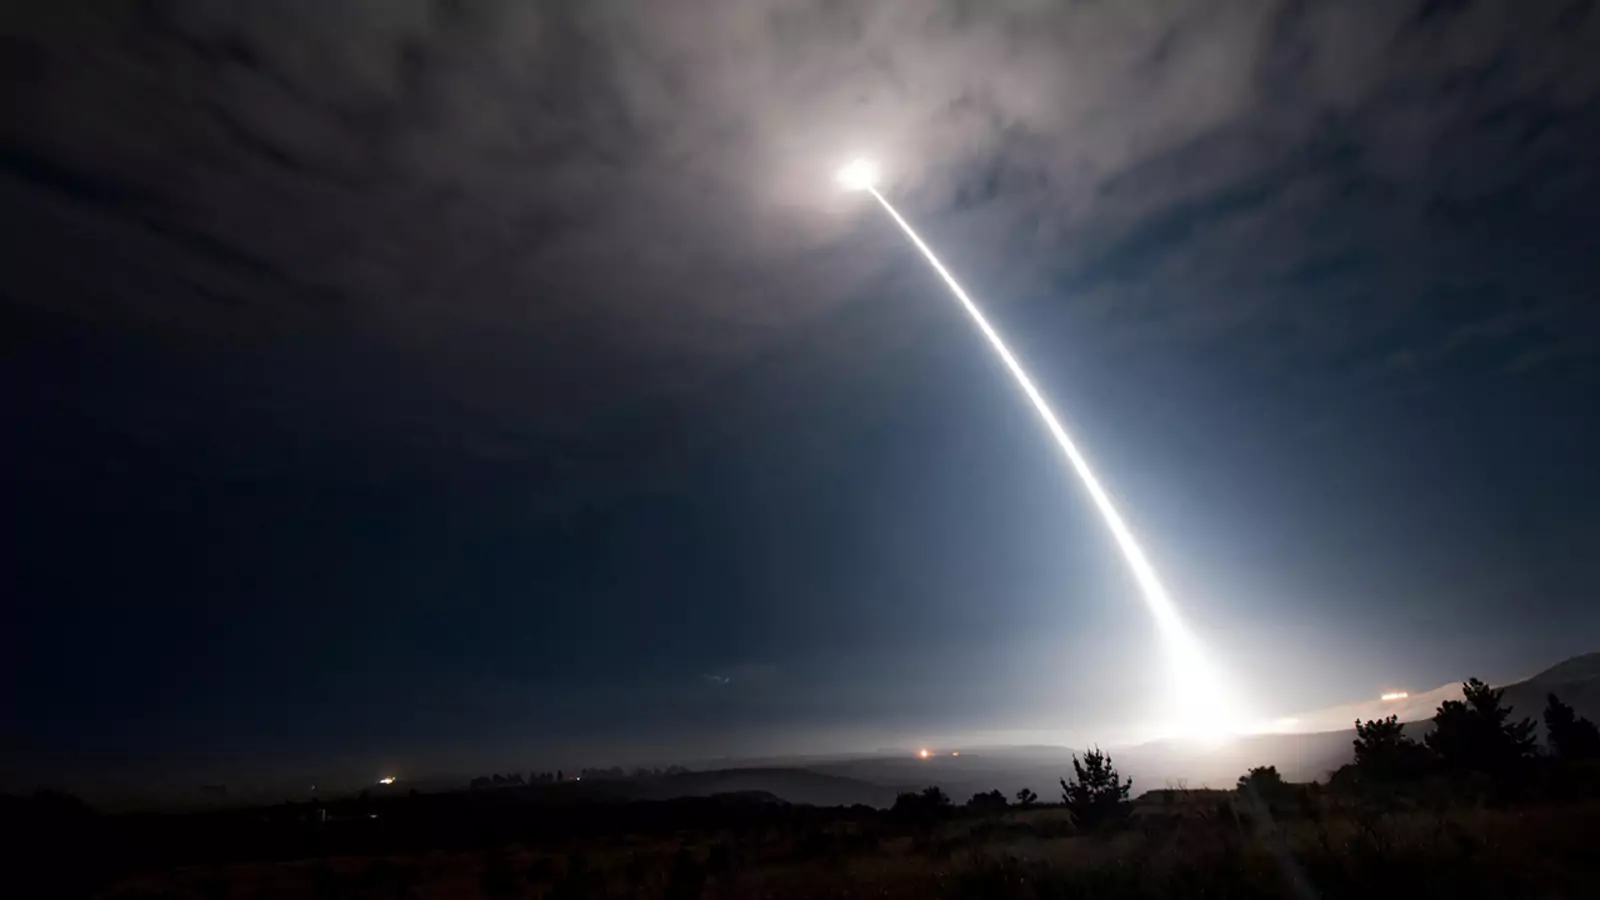 An unarmed Minuteman III intercontinental ballistic missile is test launched on August 2, 2017.